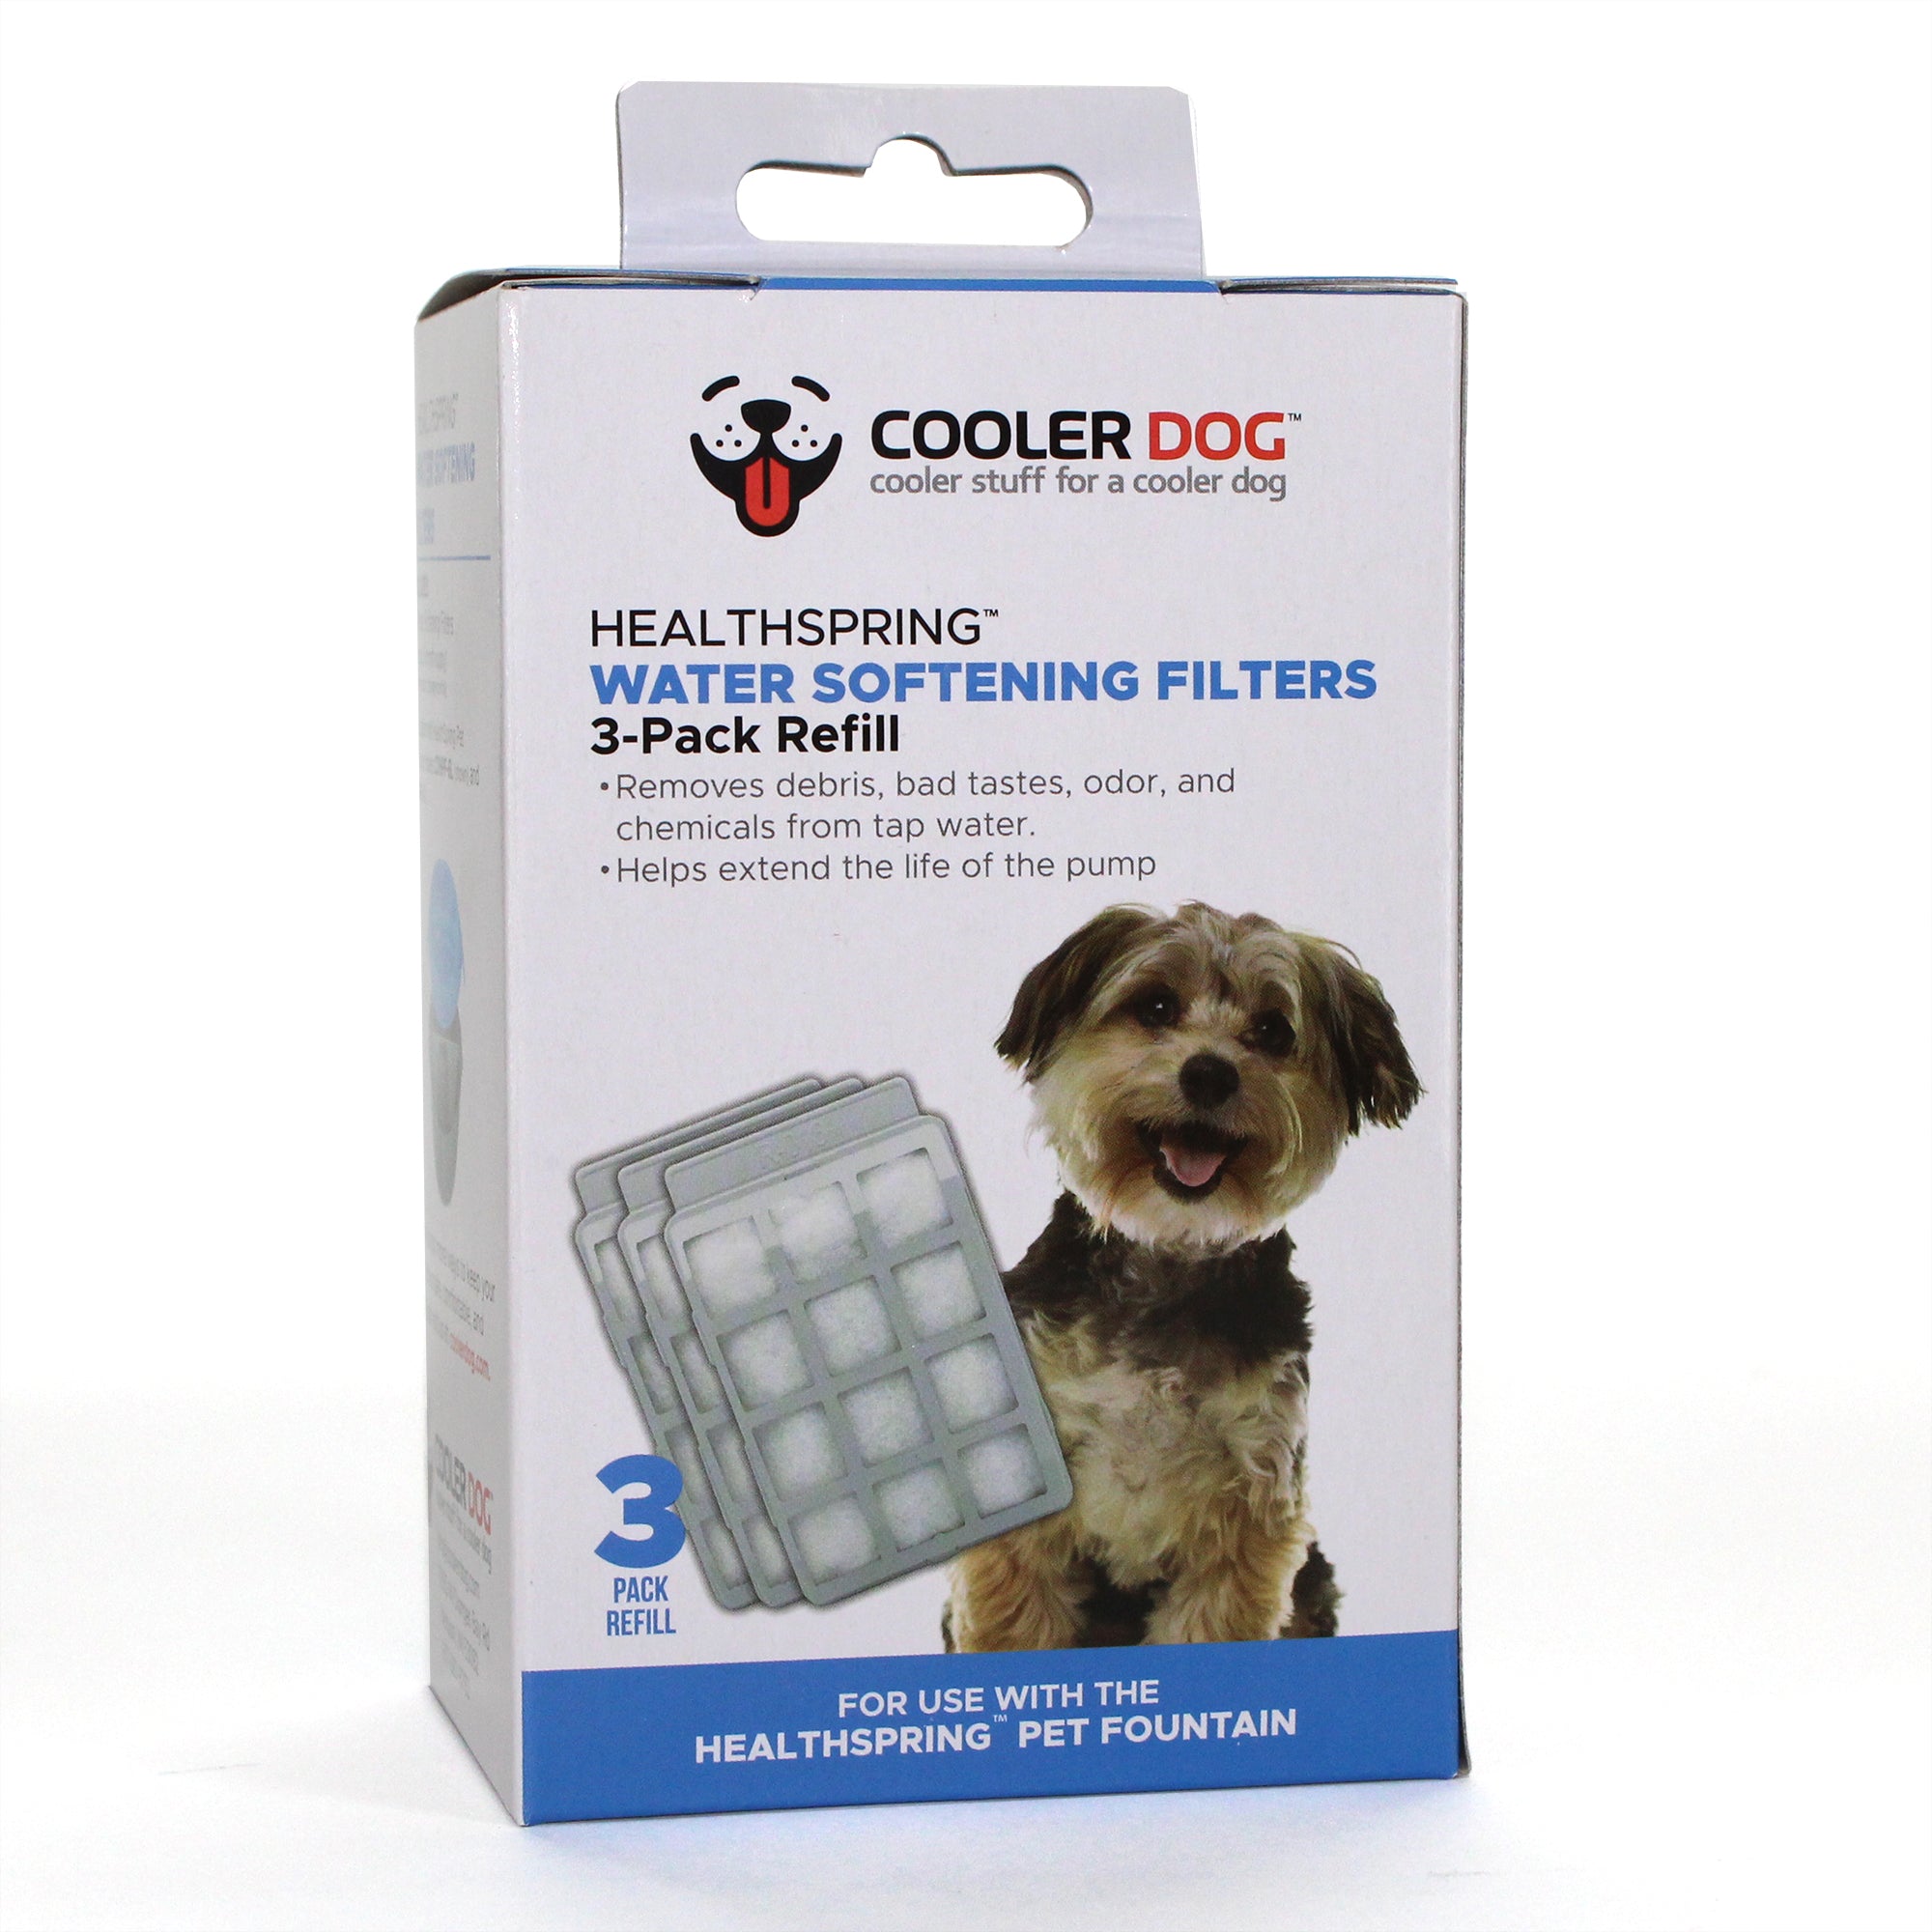 Water softener filter for the CoolerDog Healthspring pet fountain